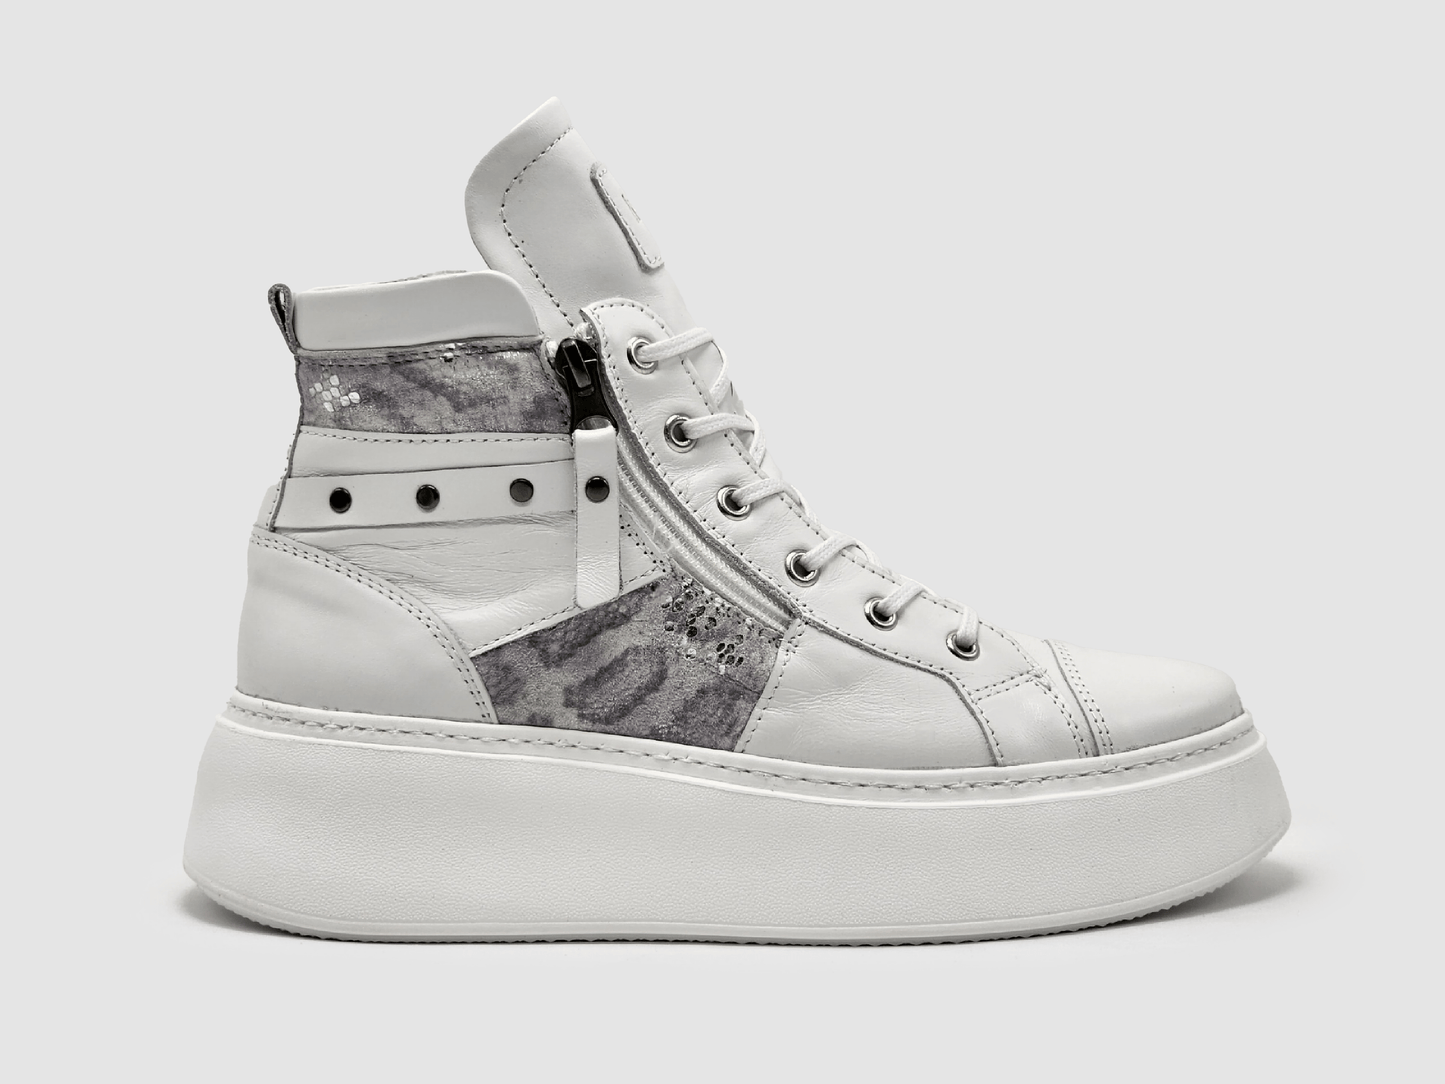 Women's Tall Zip-Up Leather Sneakers - Kacper Global Shoes 